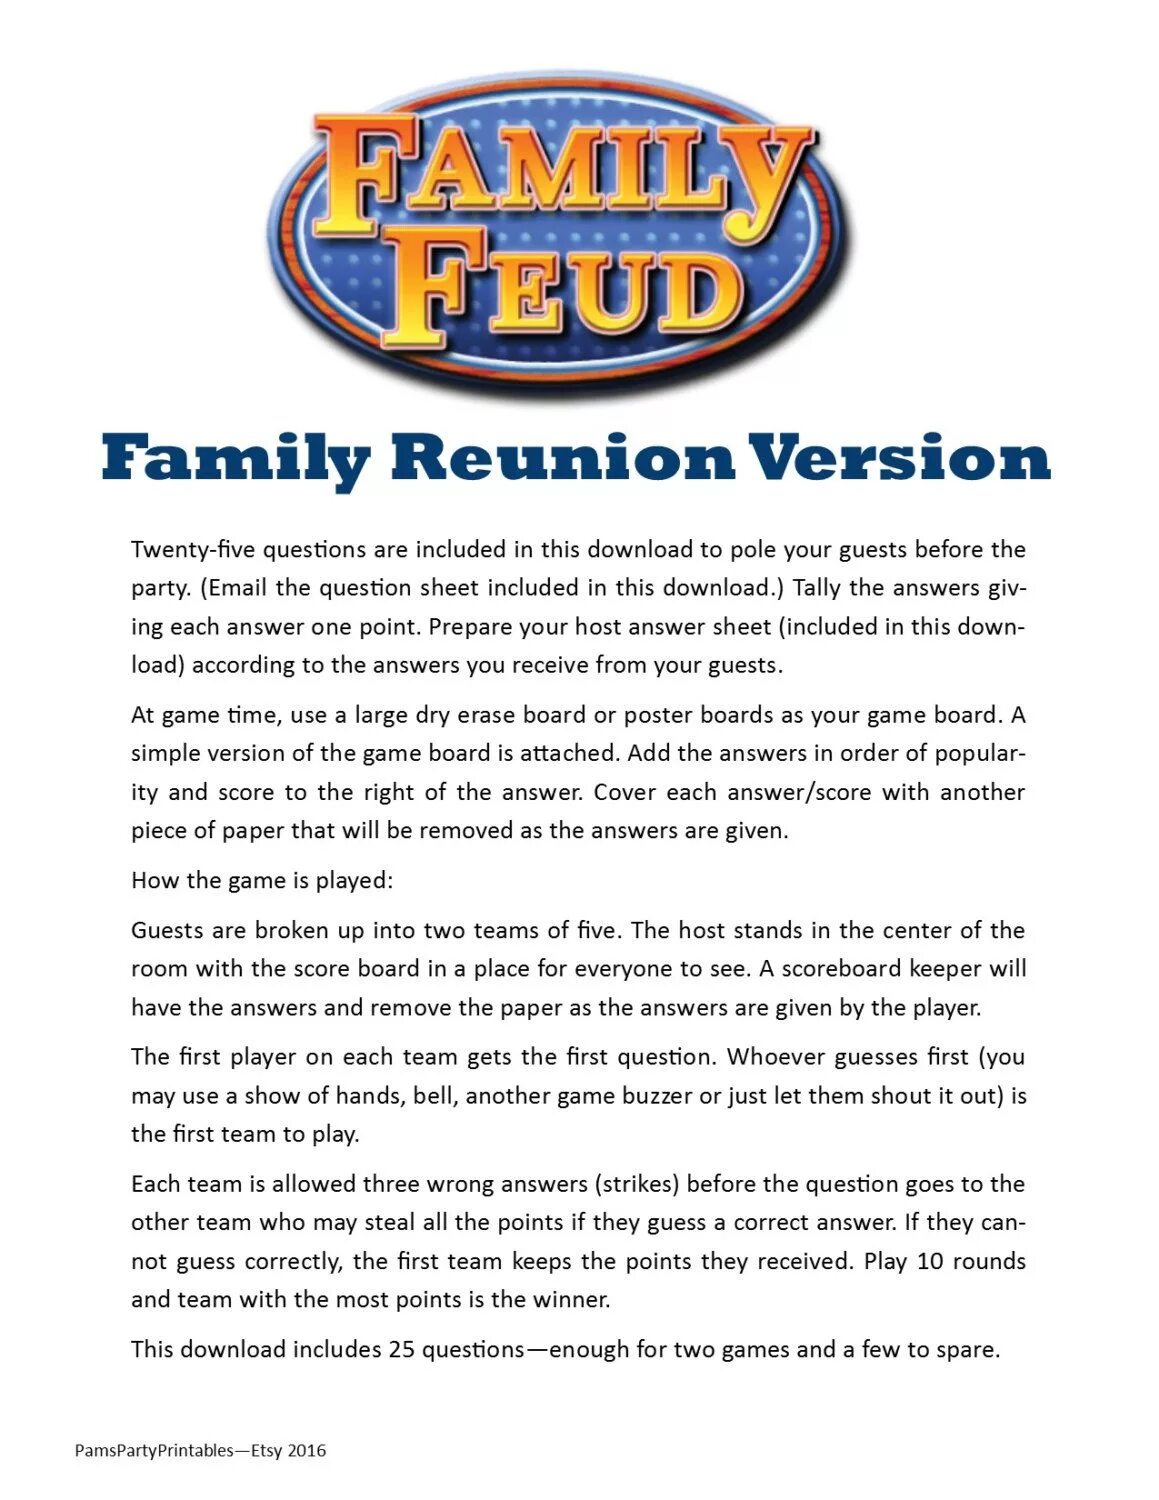 Family Feud game. Family Feud Christmas questions POWERPOINT. POPCAP games Family Feud. Printable Family Reunion games. Questions about trip